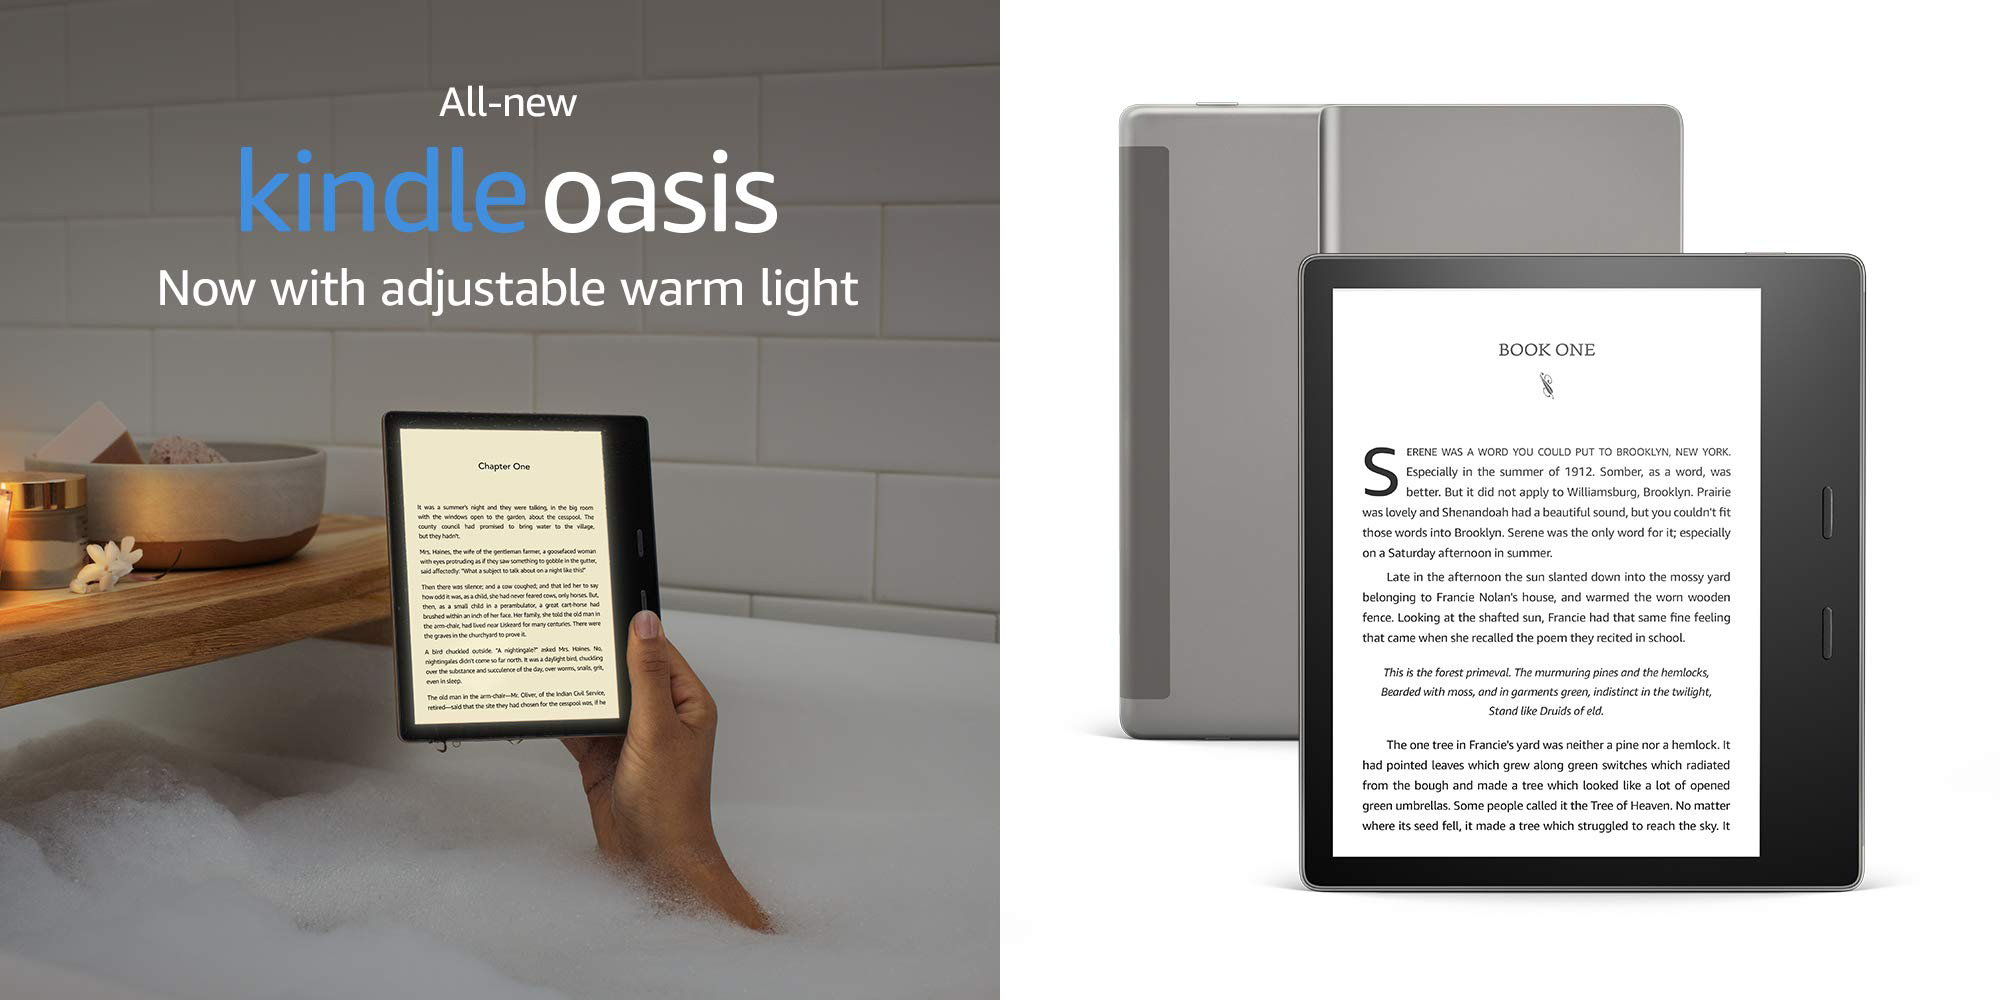 New Kindle Oasis featured